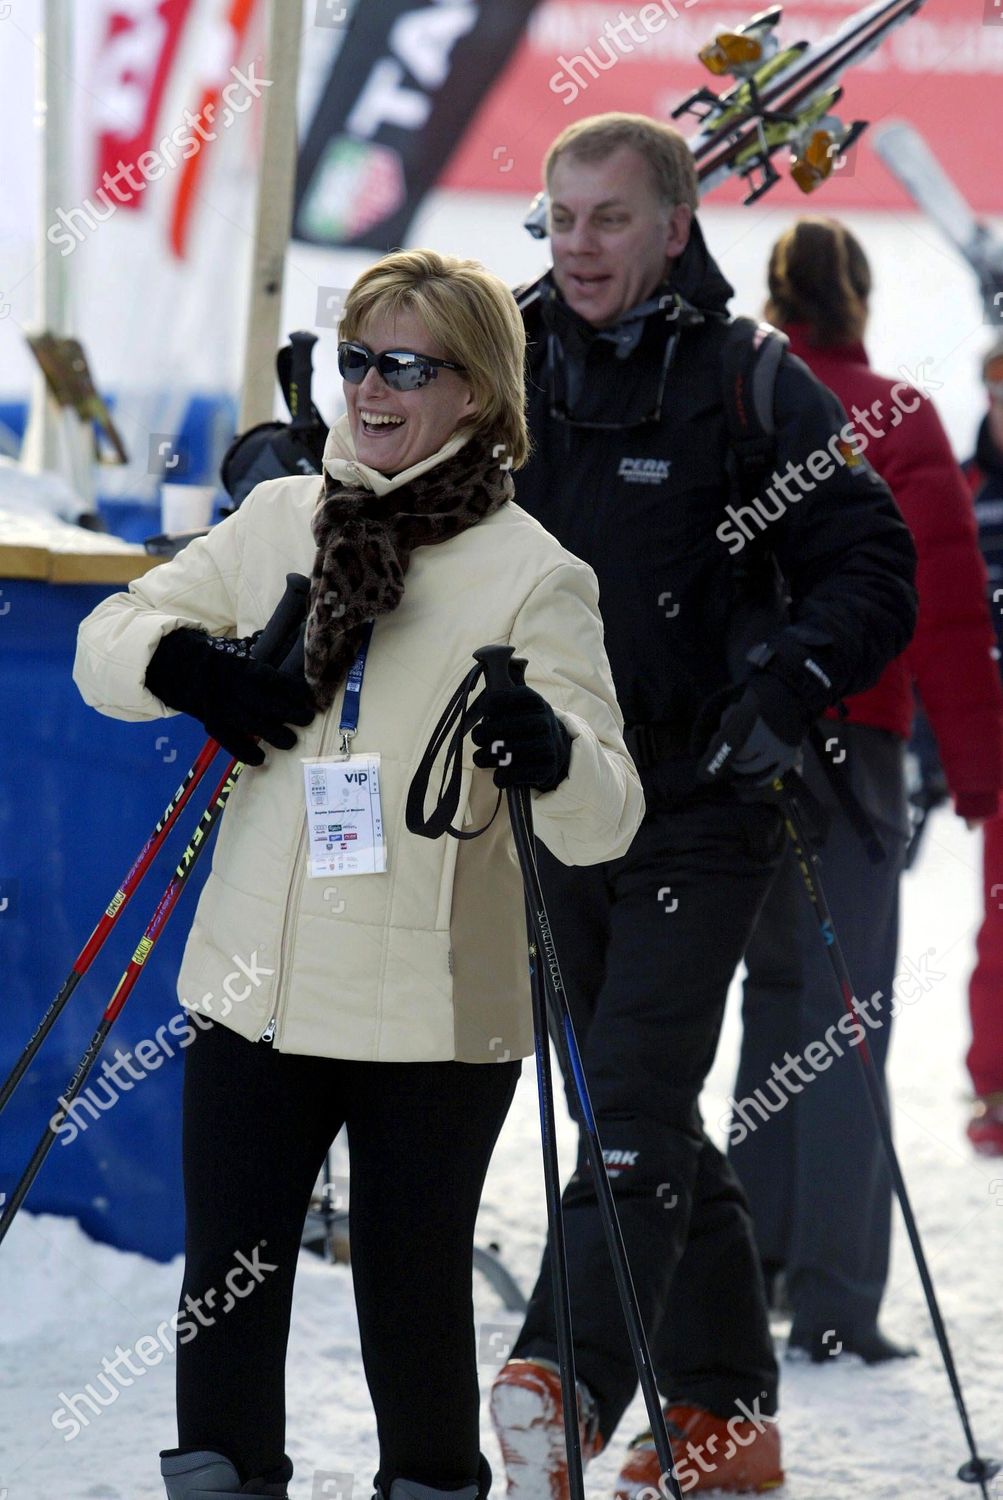 prince-edward-and-sophie-countess-wessex-at-the-world-alpine-ski-championships-st-moritz-switzerland-shutterstock-editorial-403522r.jpg